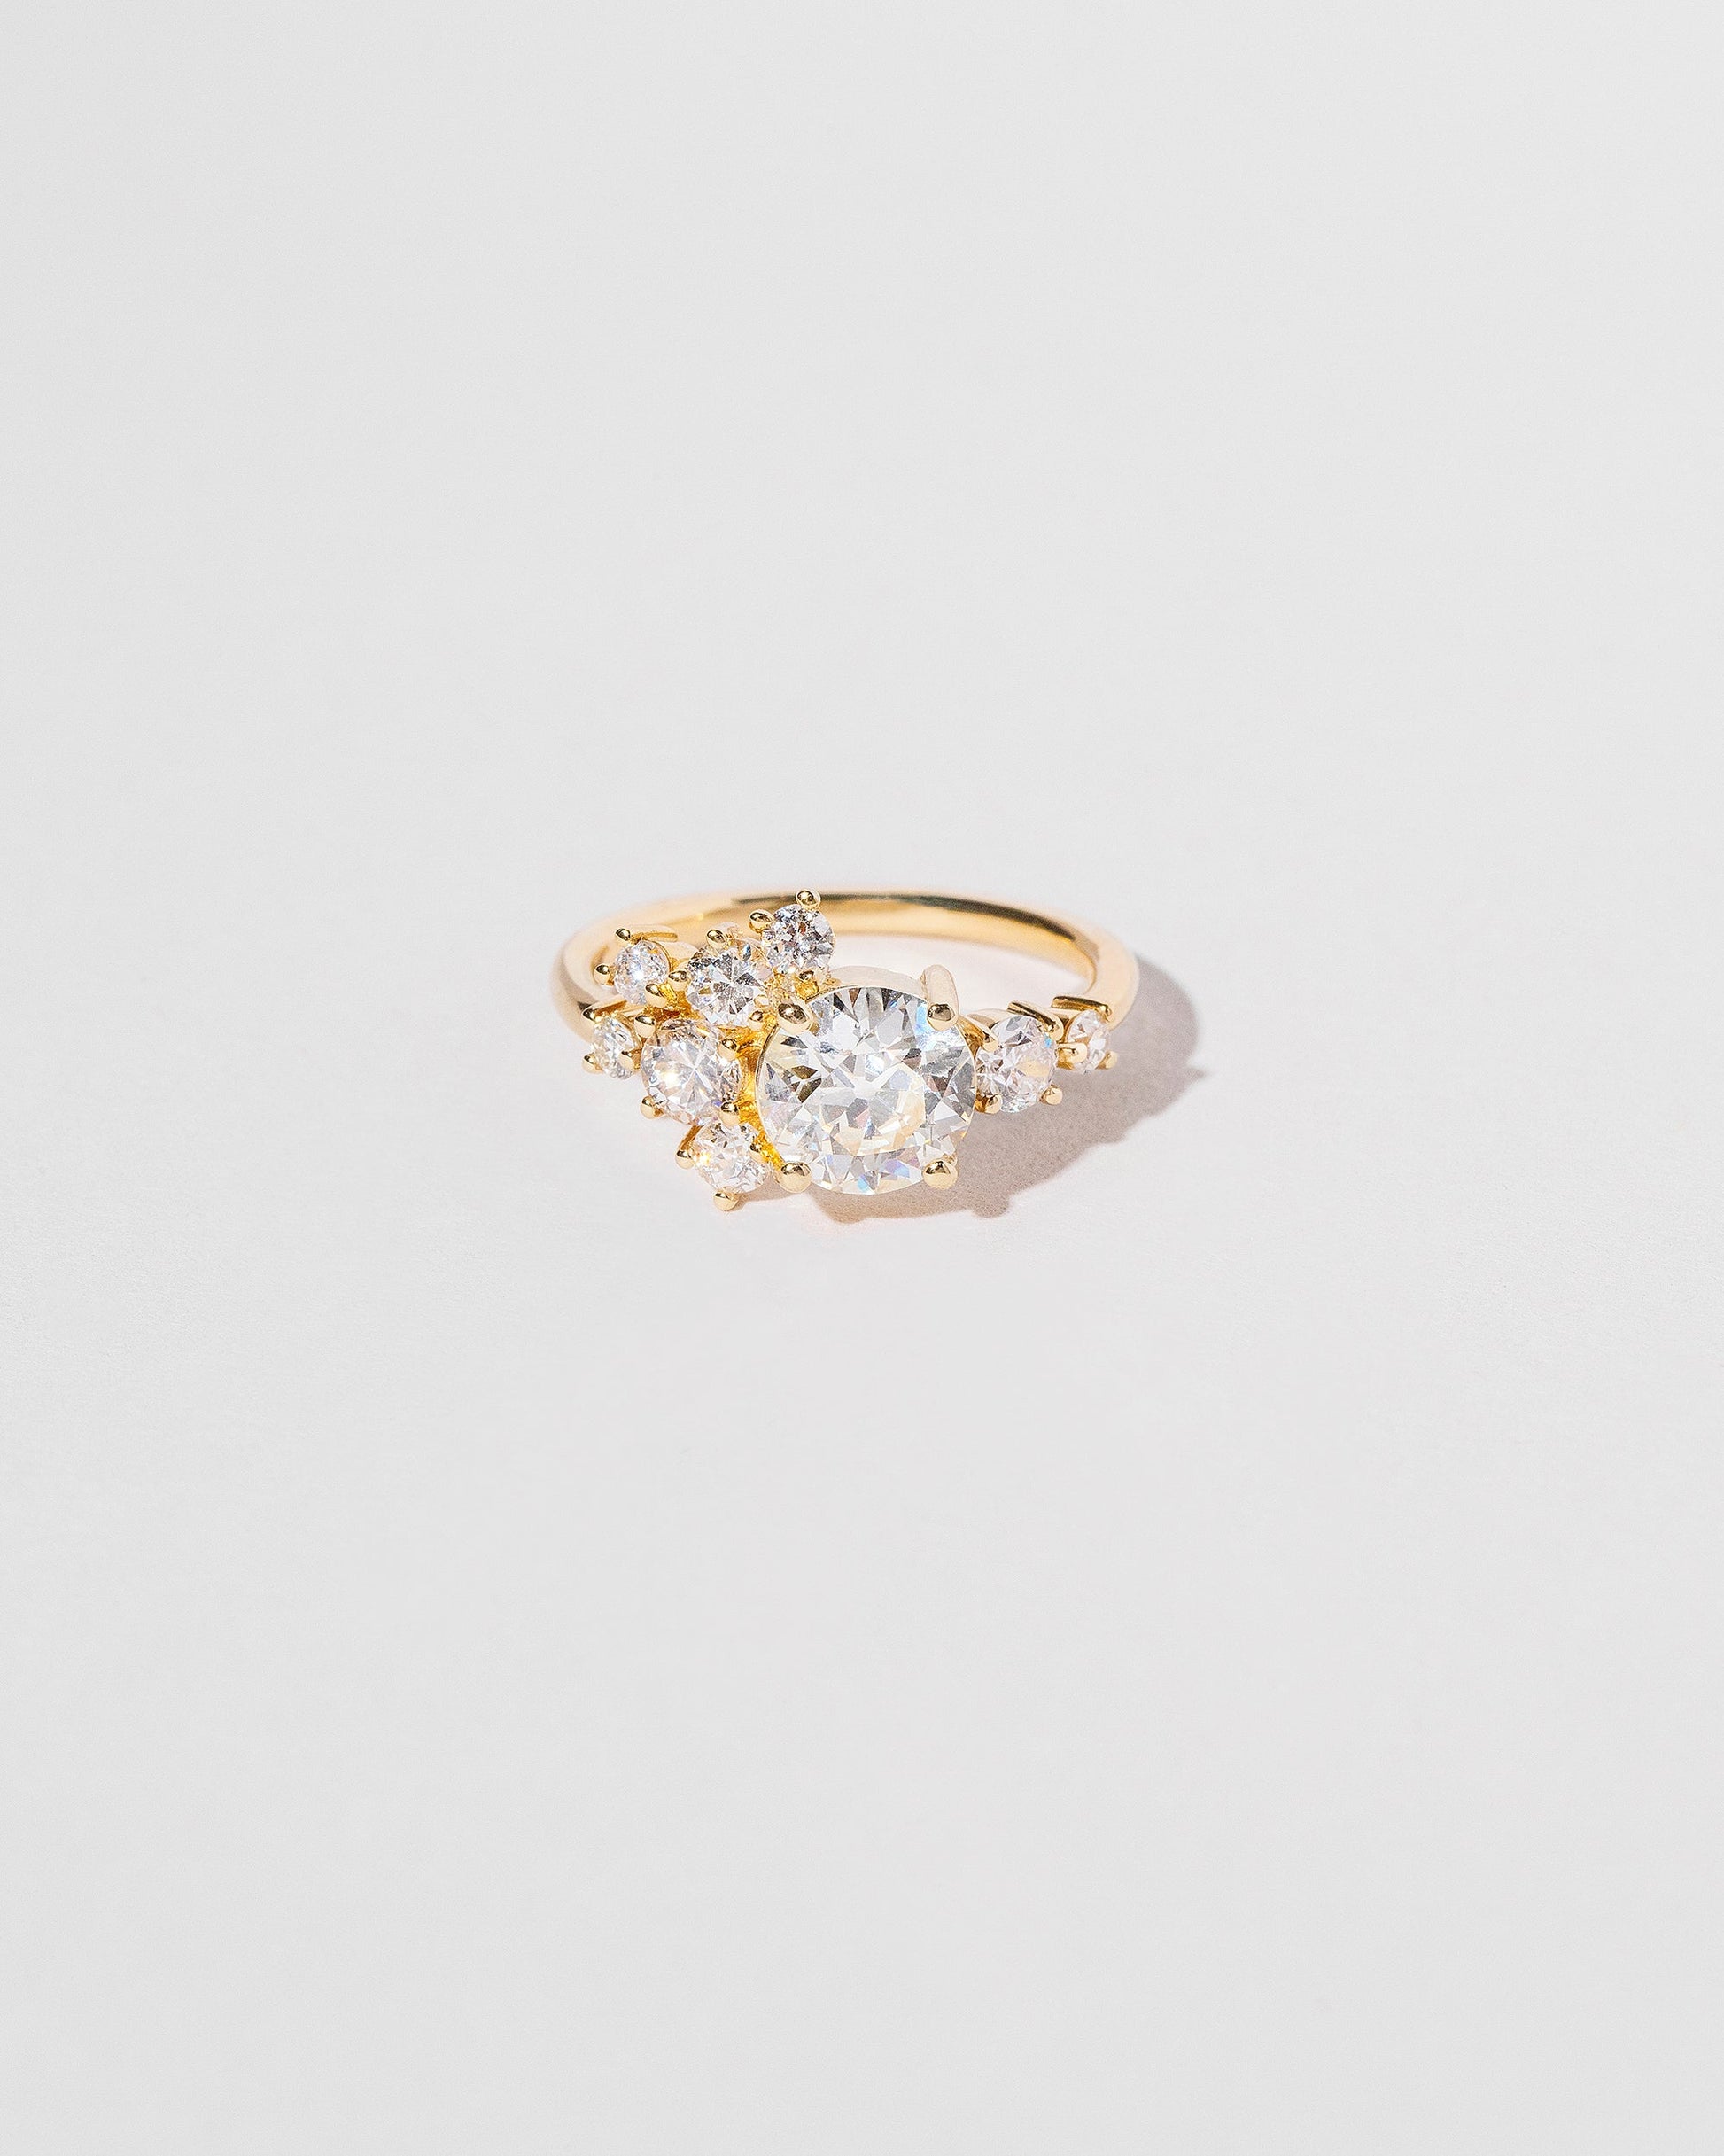 Cluster style ring with white diamonds set in 18k yellow gold, close up on light color background.